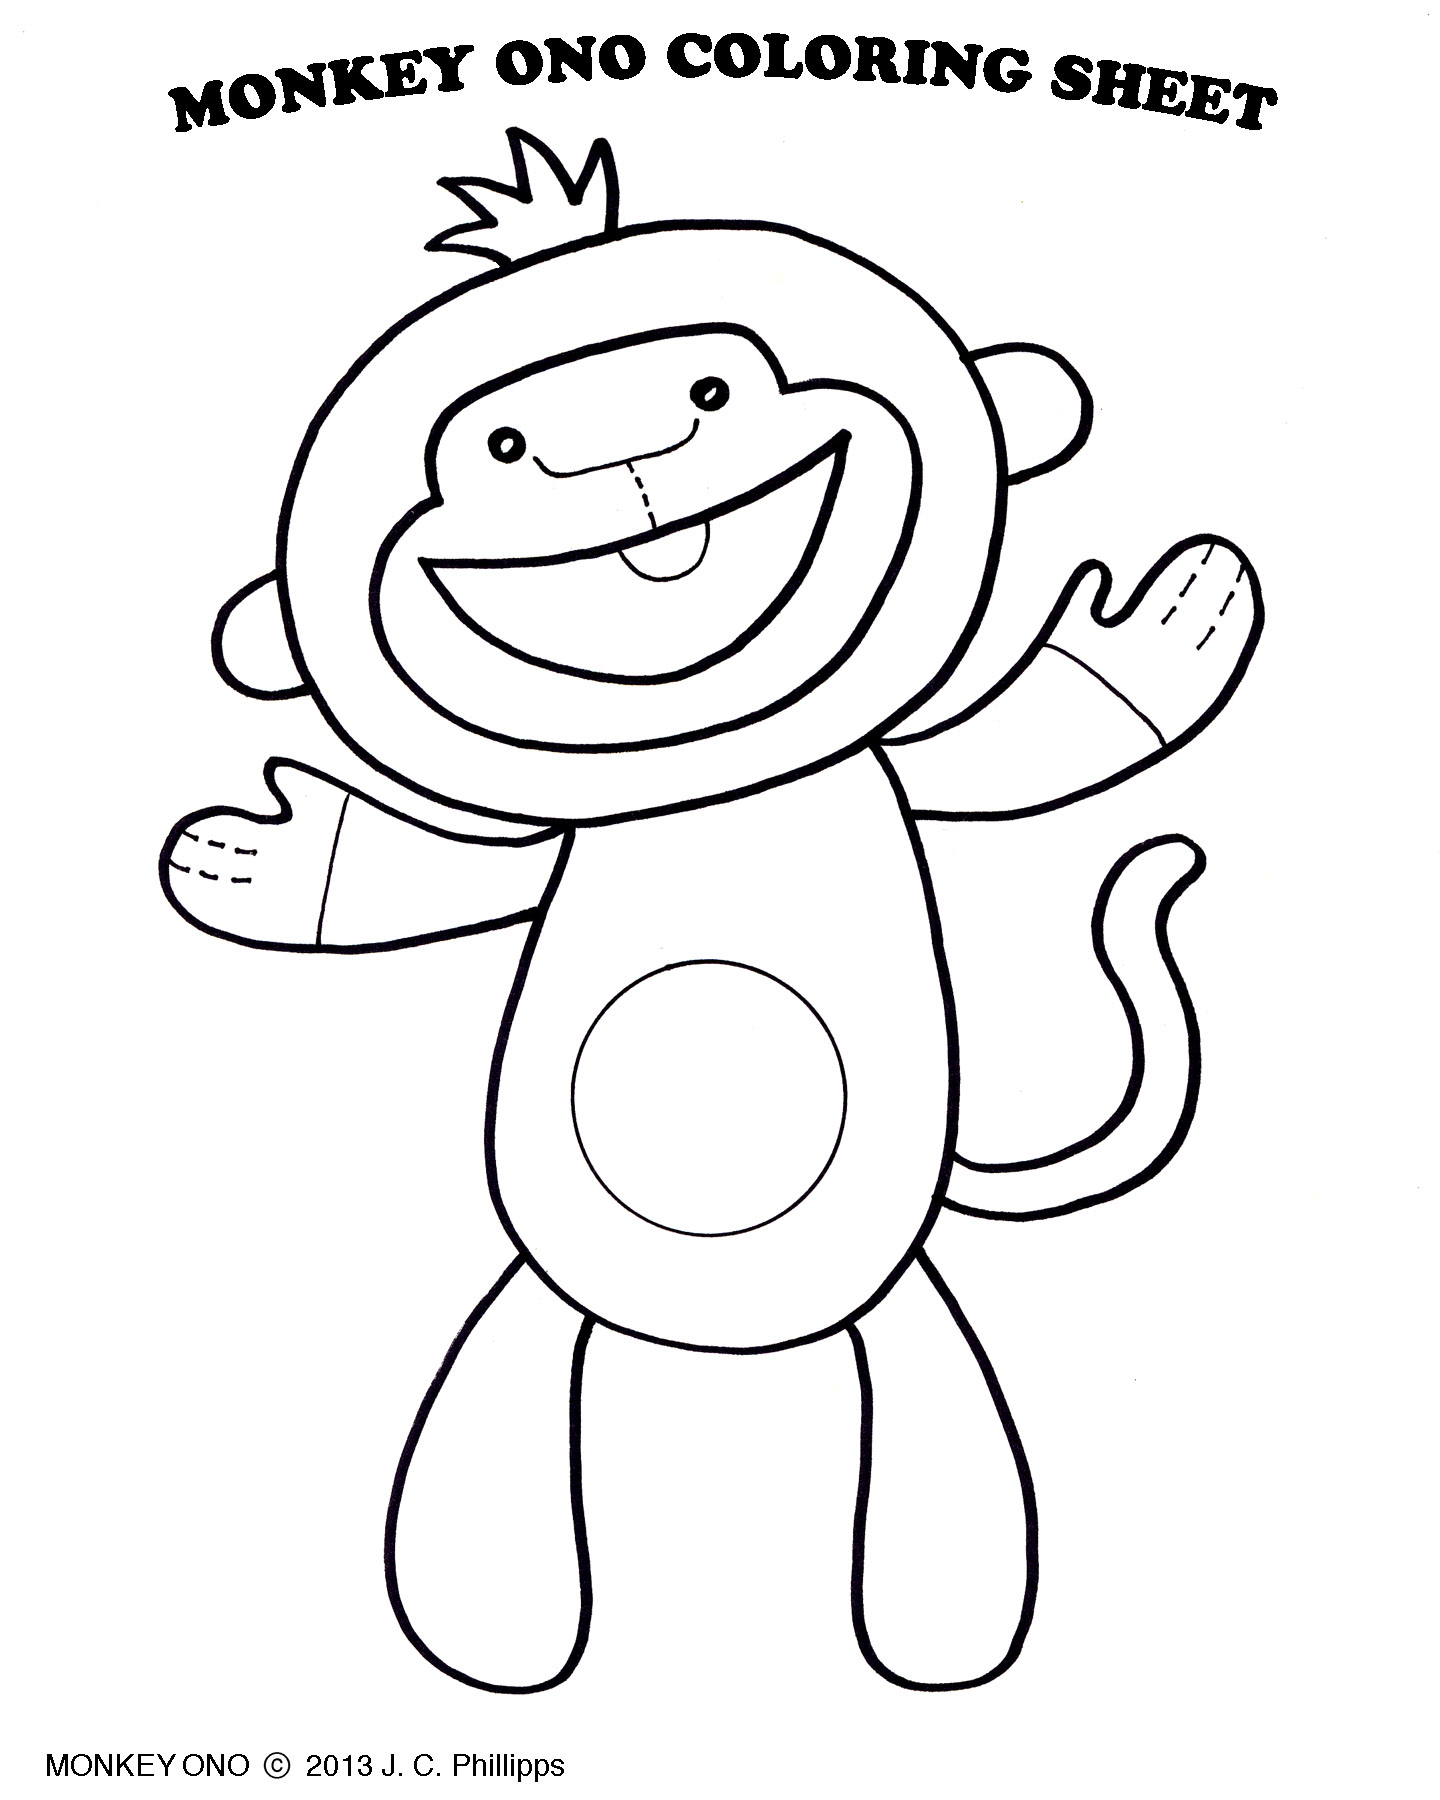  Monkey coloring pages | Monkey coloring page | #27